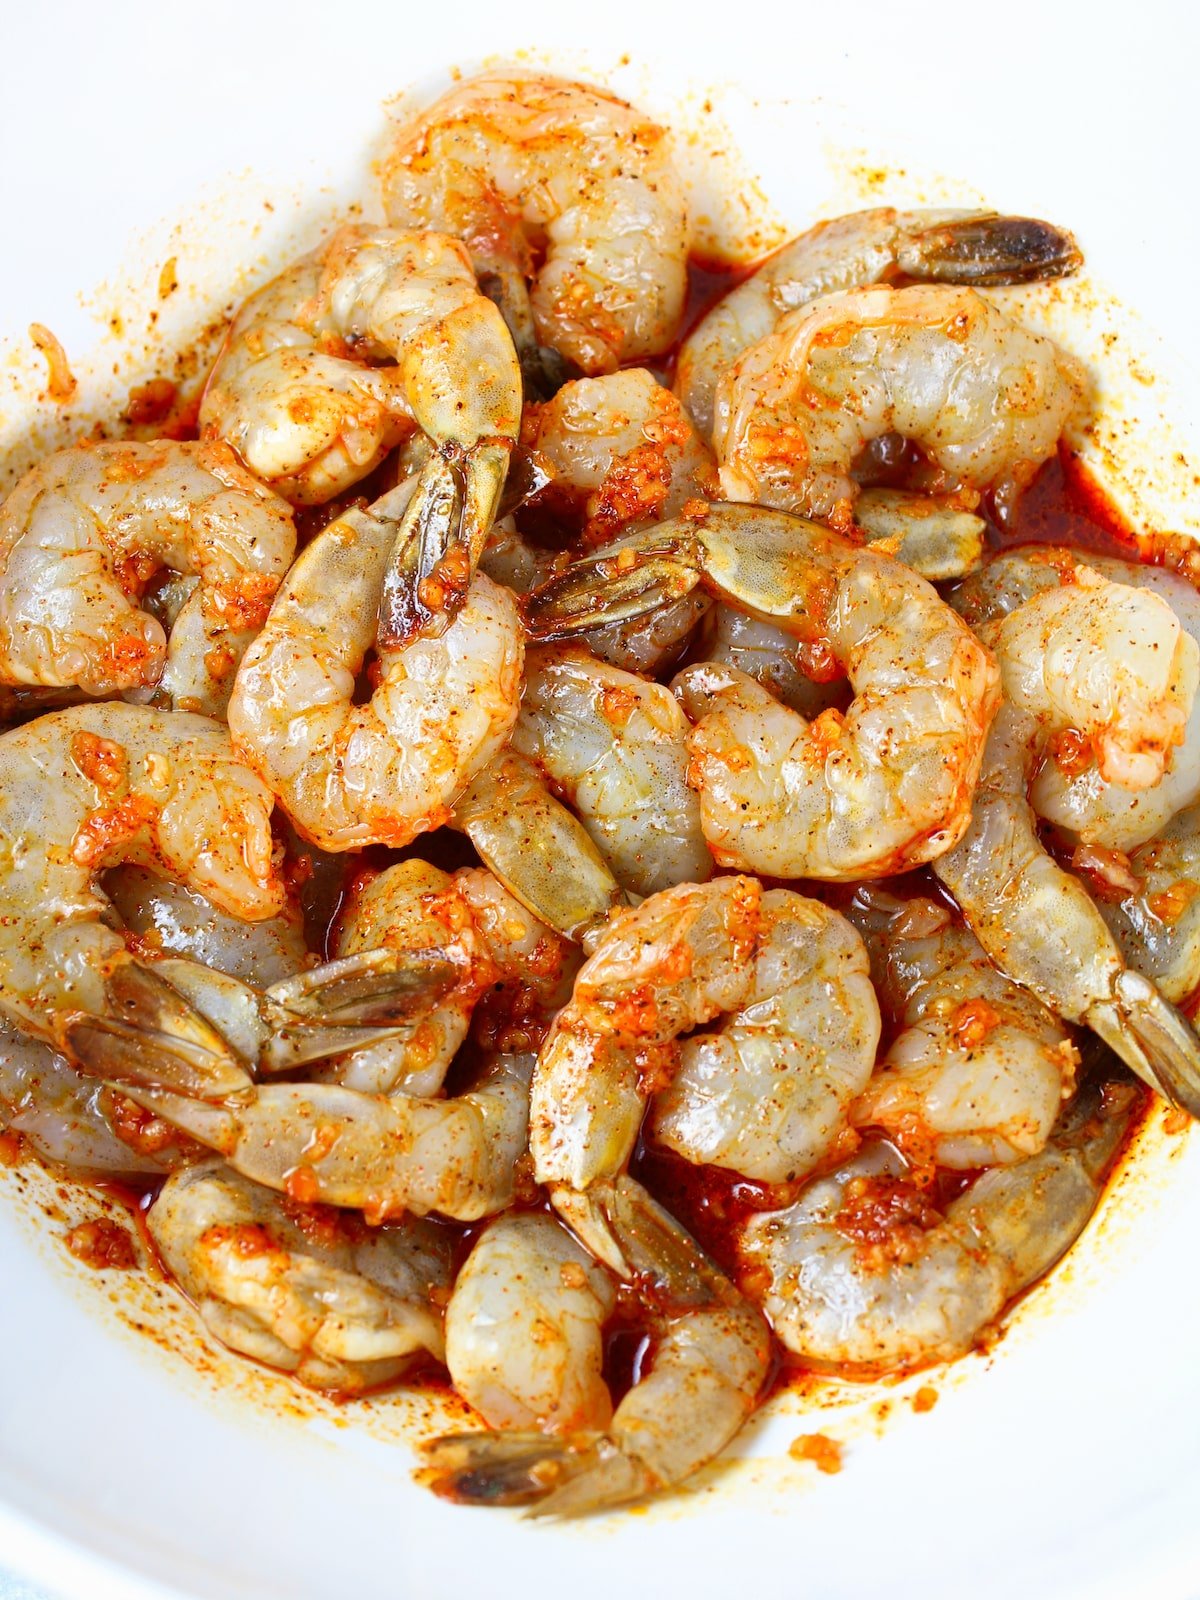 Shrimp in a bowl tossed in the marinade.